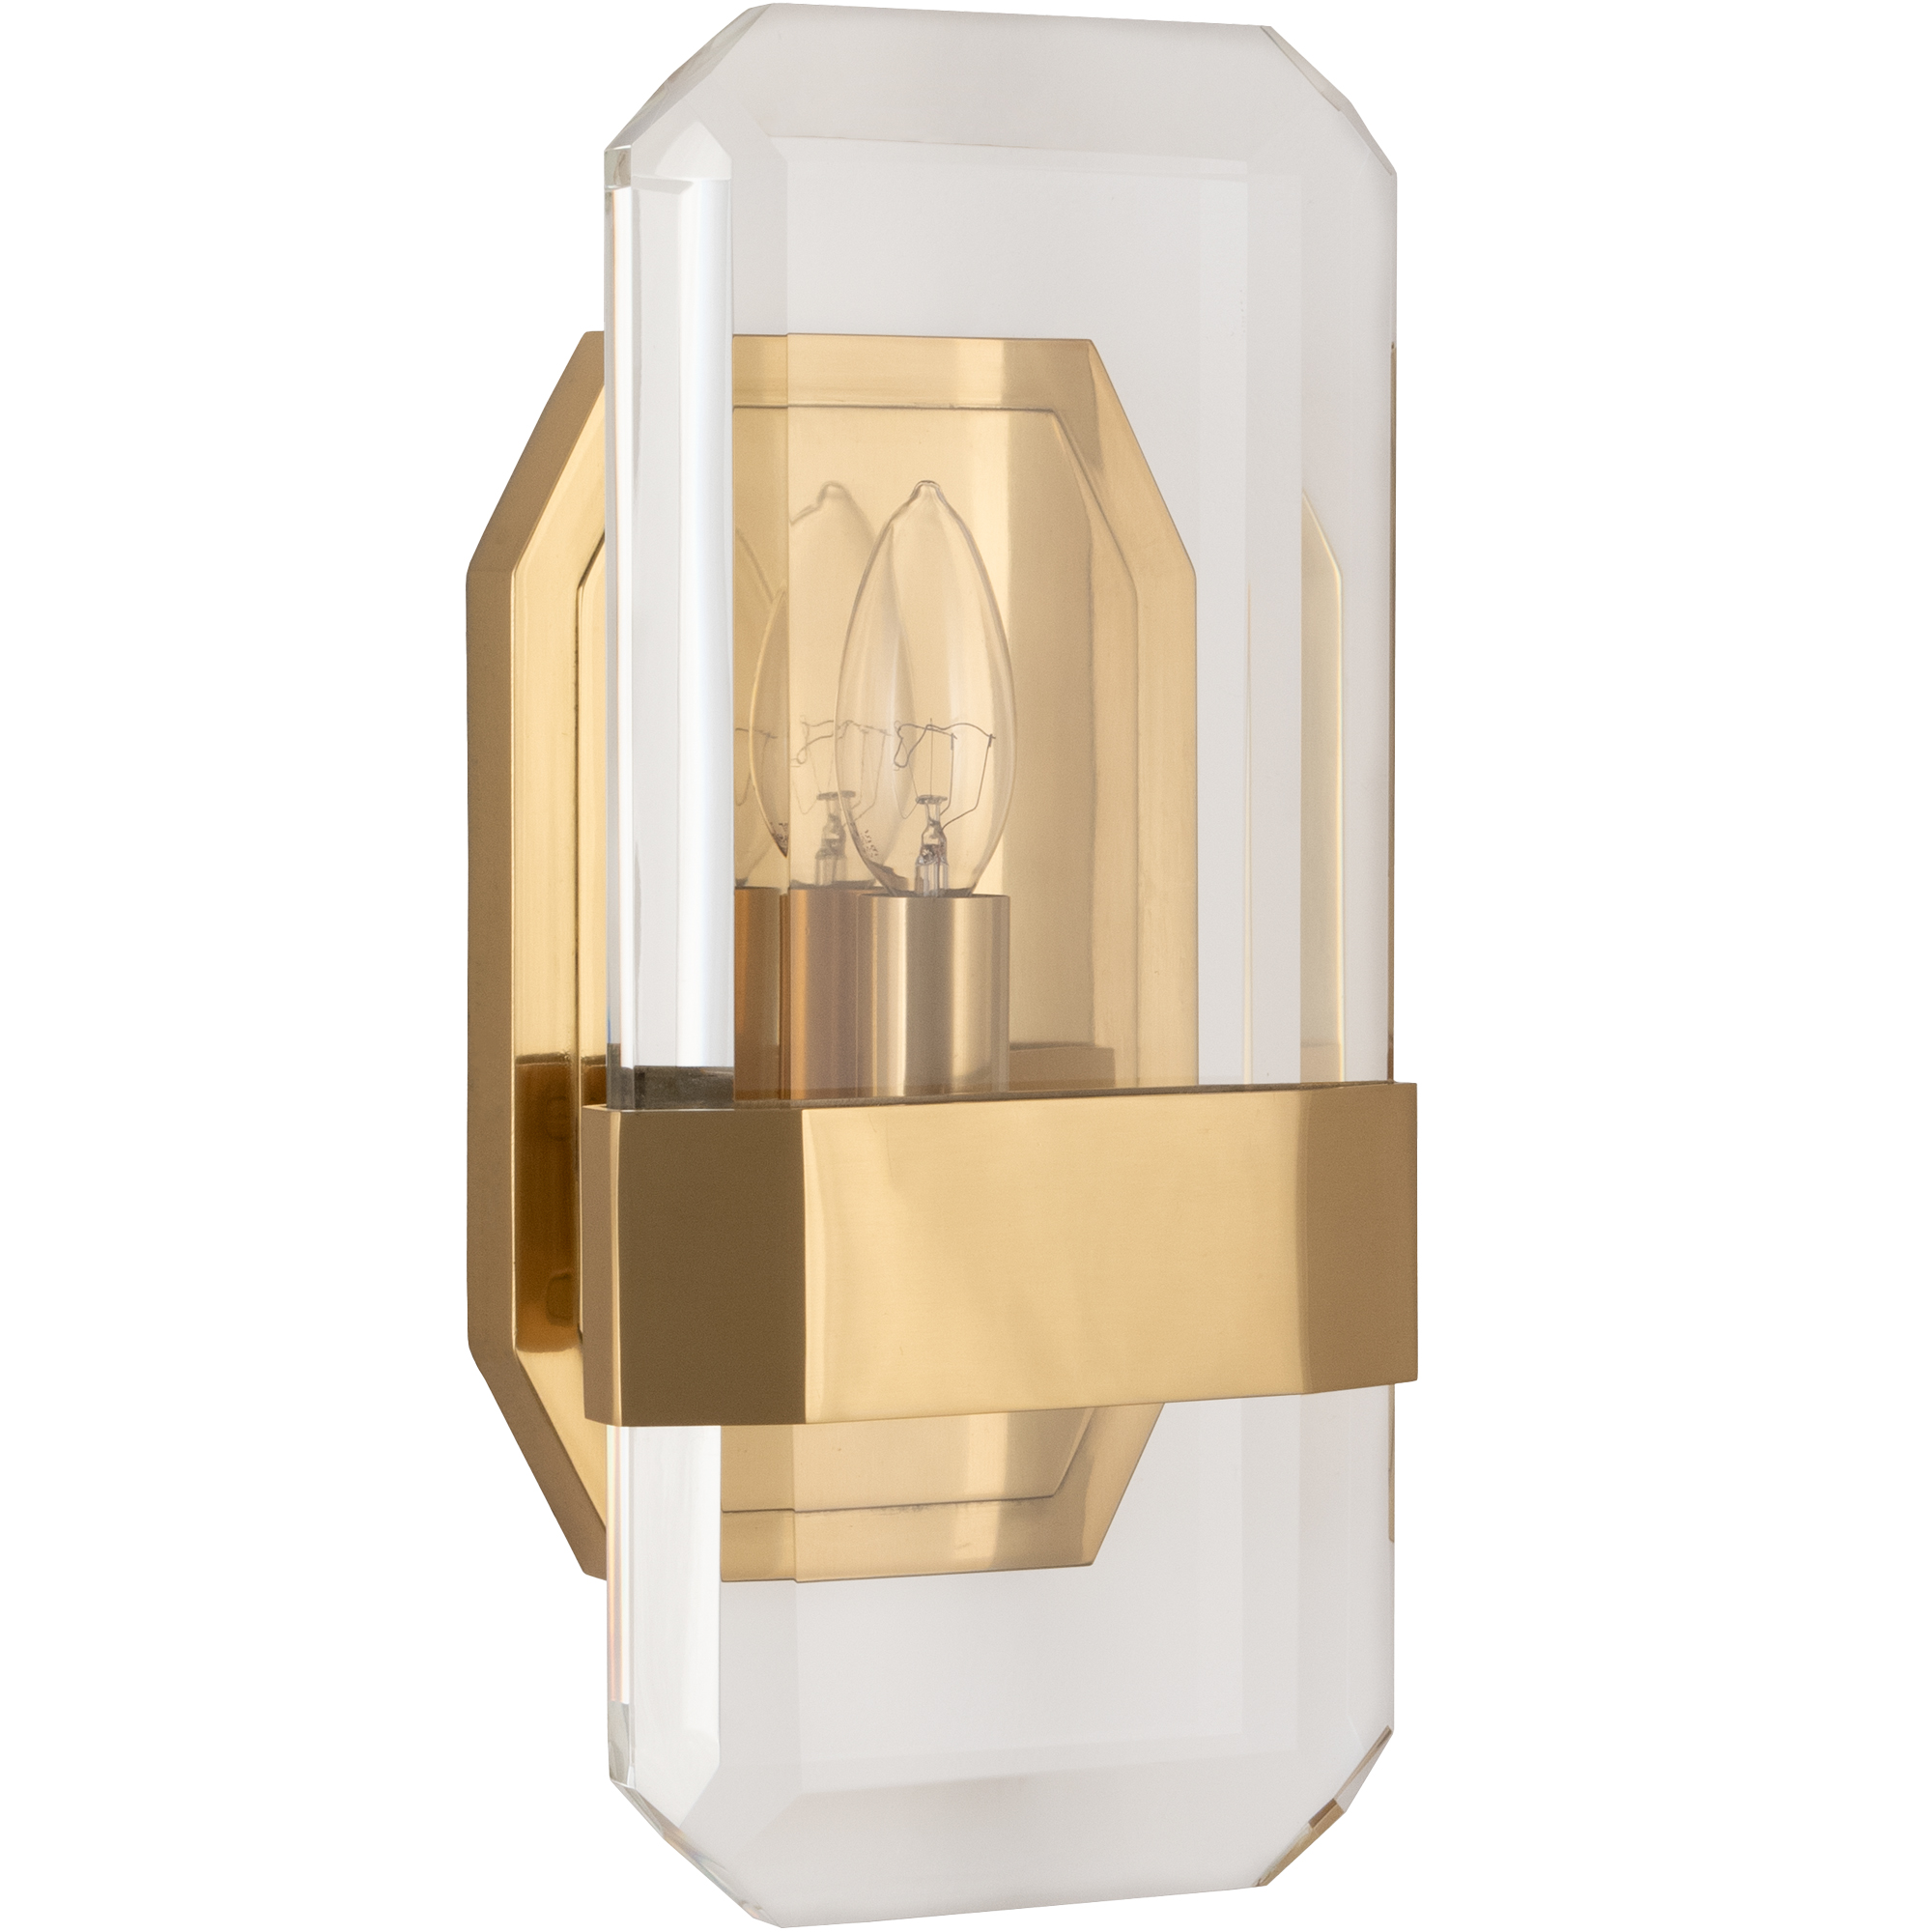 Jacqueline Wall Sconce Style #1198